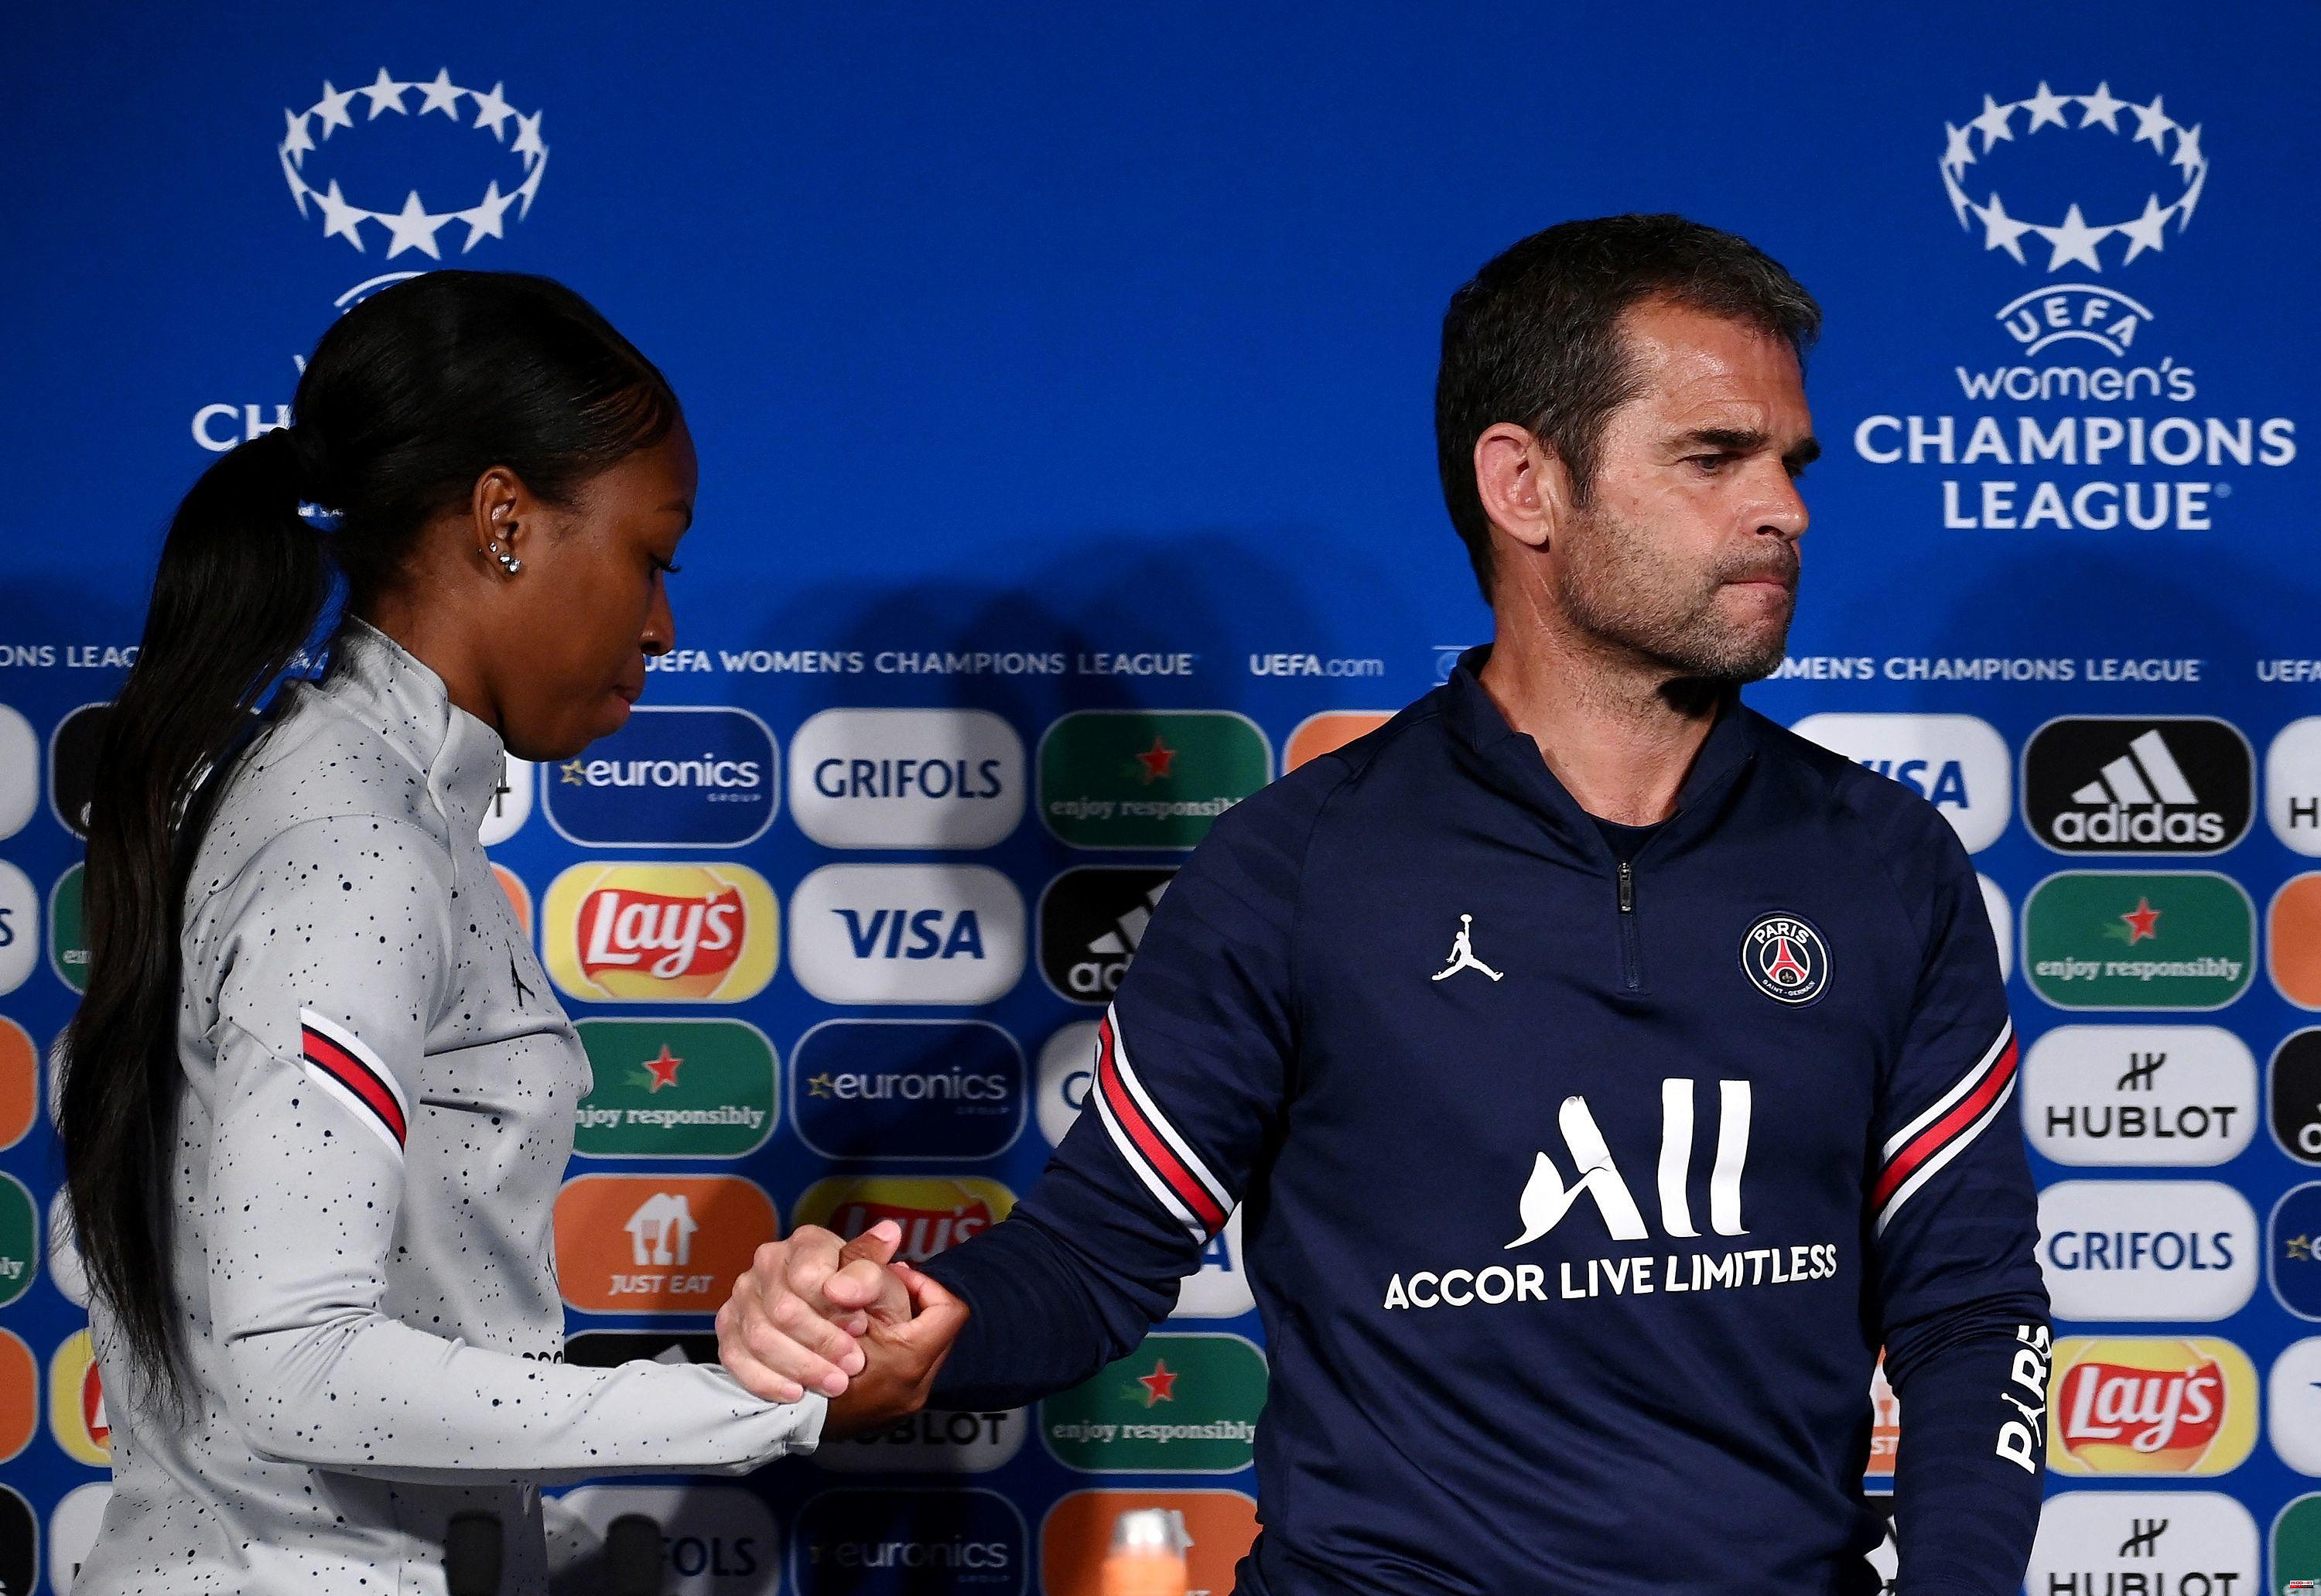 The women's PSG is investigating an "inappropriate gesture" by coach Ollé-Nicolle